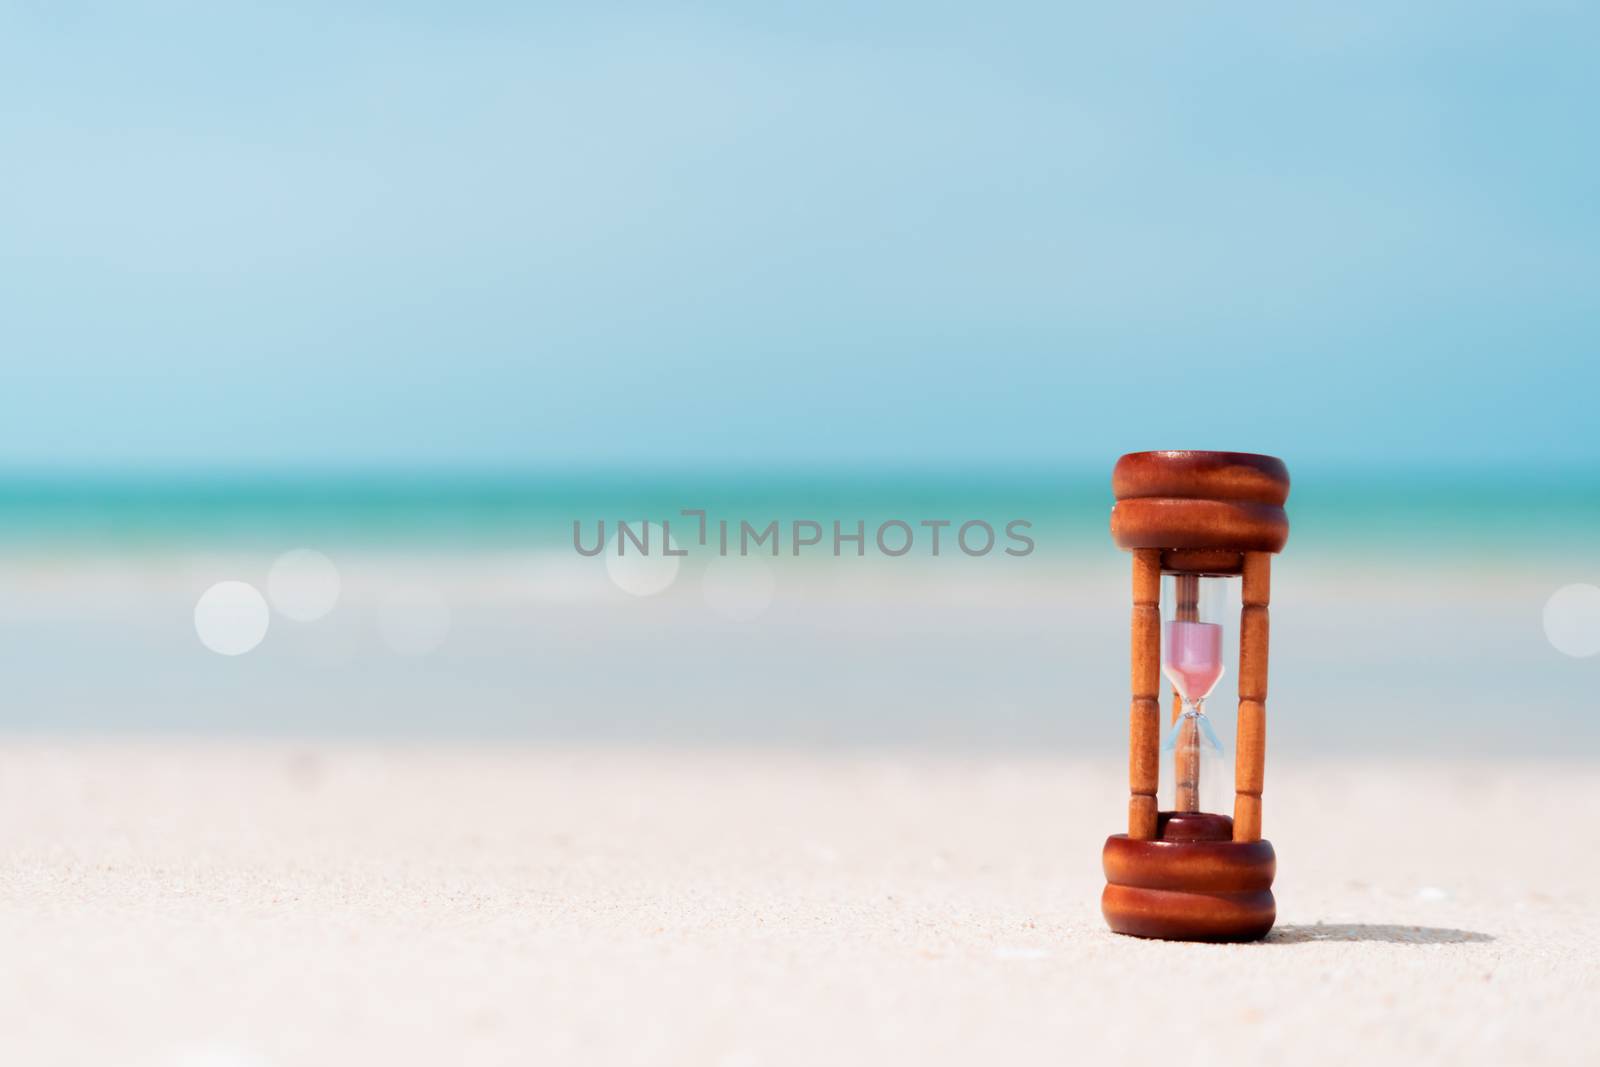 Small hourglass show time is flowing on sand beach texture background.